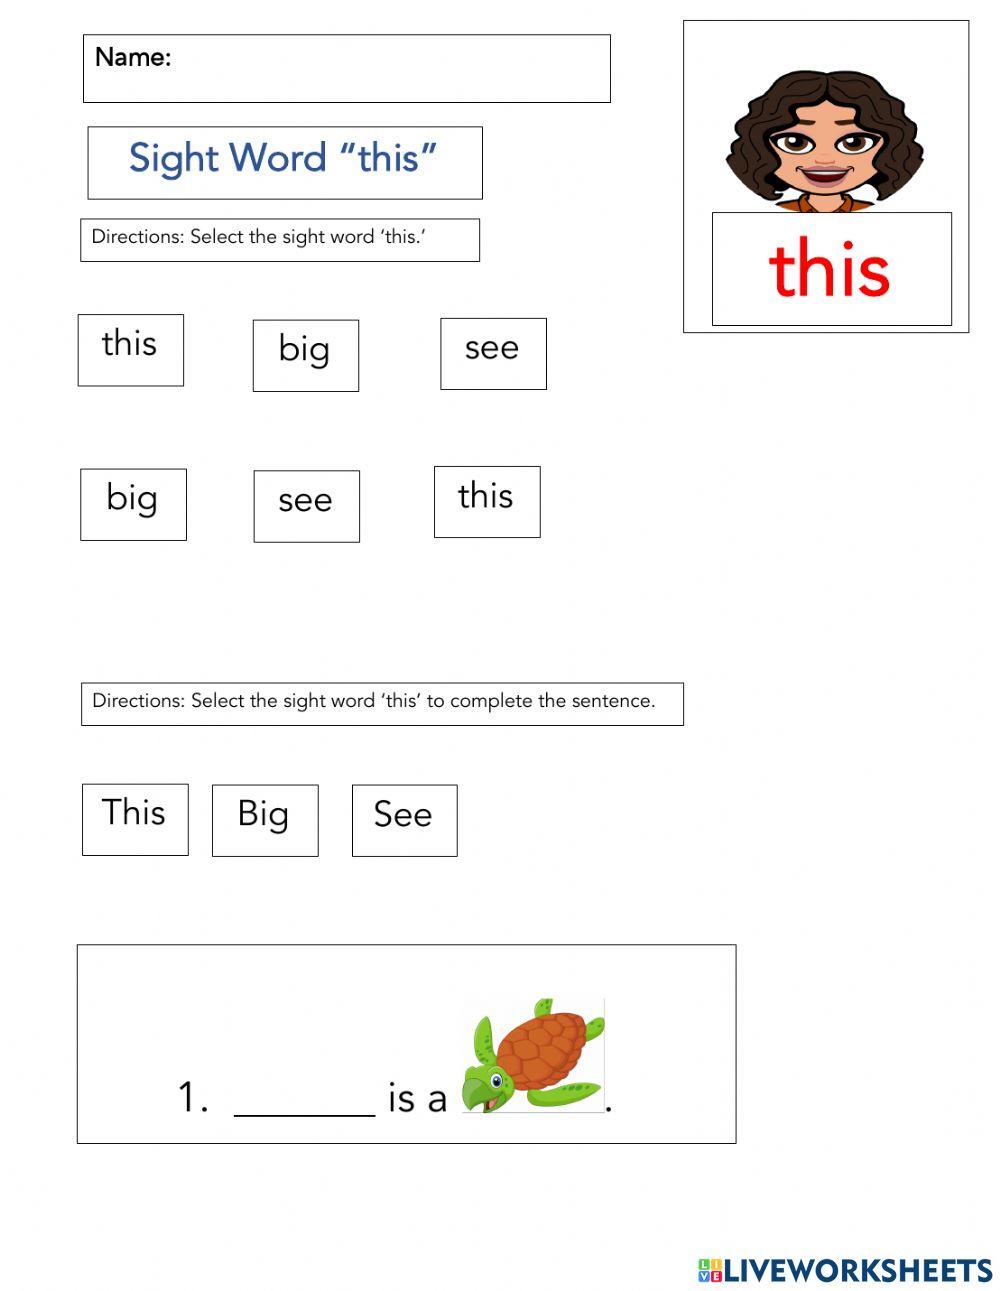 Sight Word 'this'